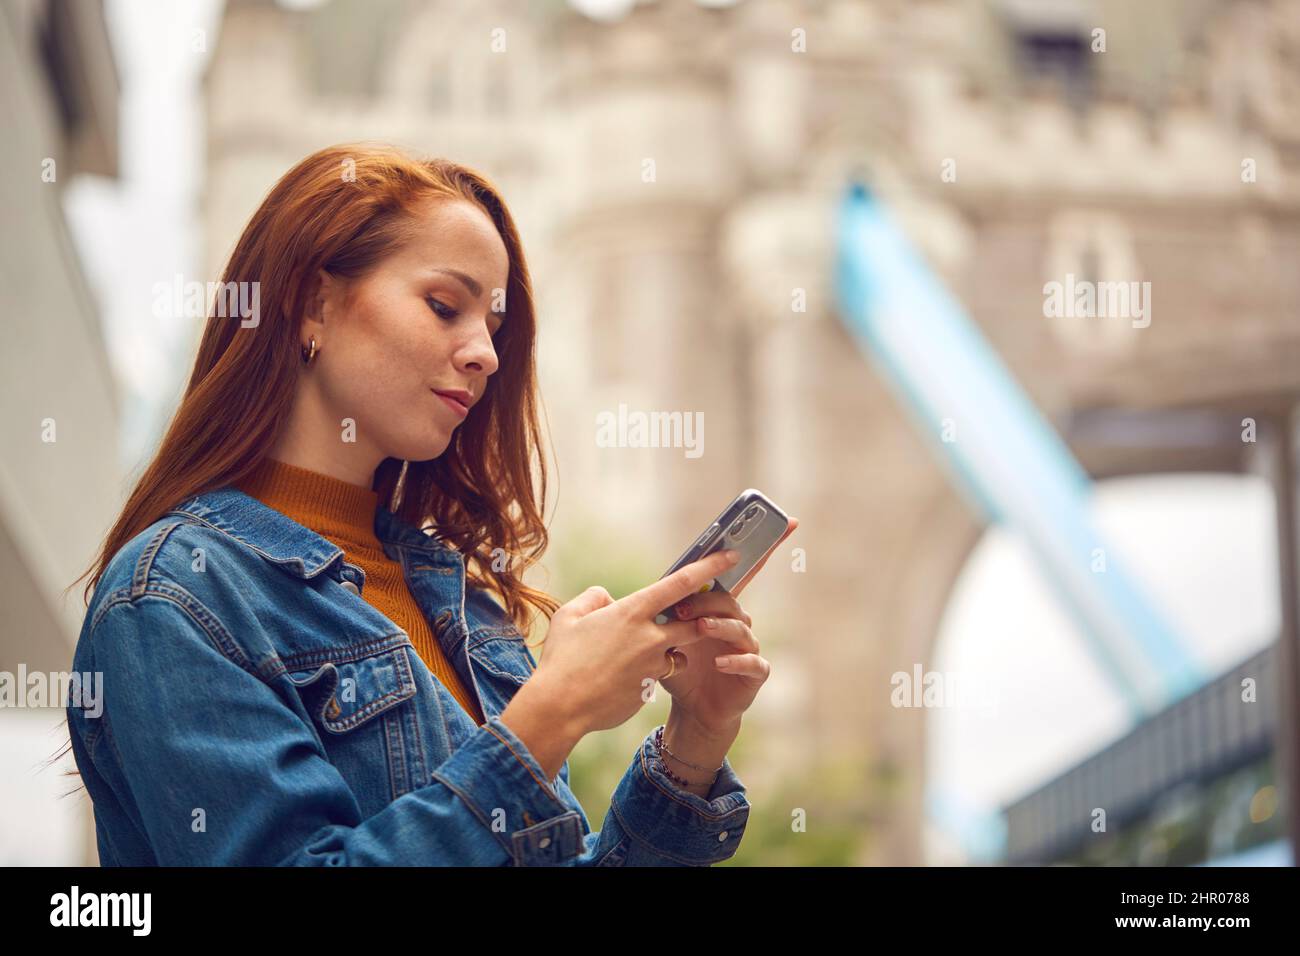 Female Vlogger Or Social Influencer Travelling Through London Using Mobile Phone By Tower Bridge Stock Photo